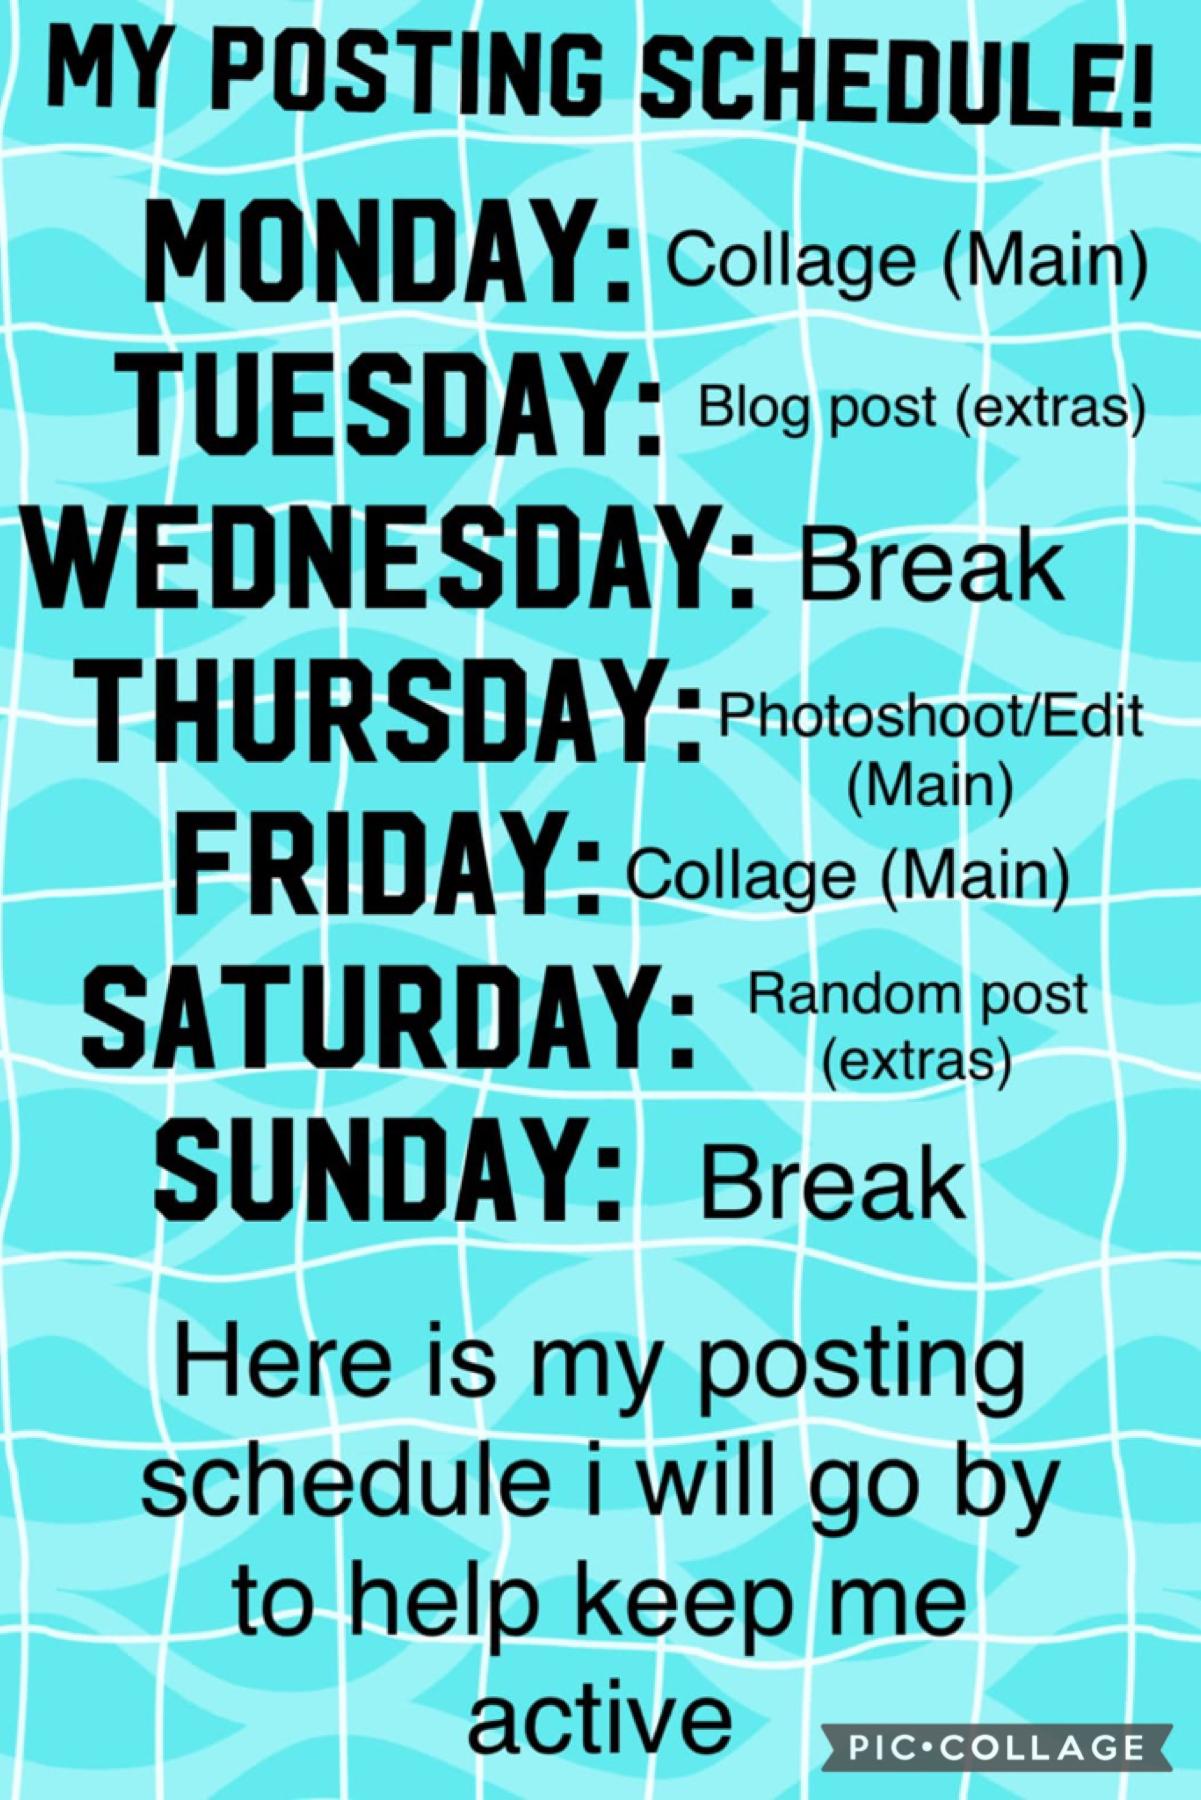 ☺️TAP☺️
Here’s my posting schedule! Please follow and repost this to help me and help other people realize that I am back on PC! Please follow and check out both of my accounts! 
❤️Lauren
@-rainbow-waves-
@-rainbow-waves-extras-